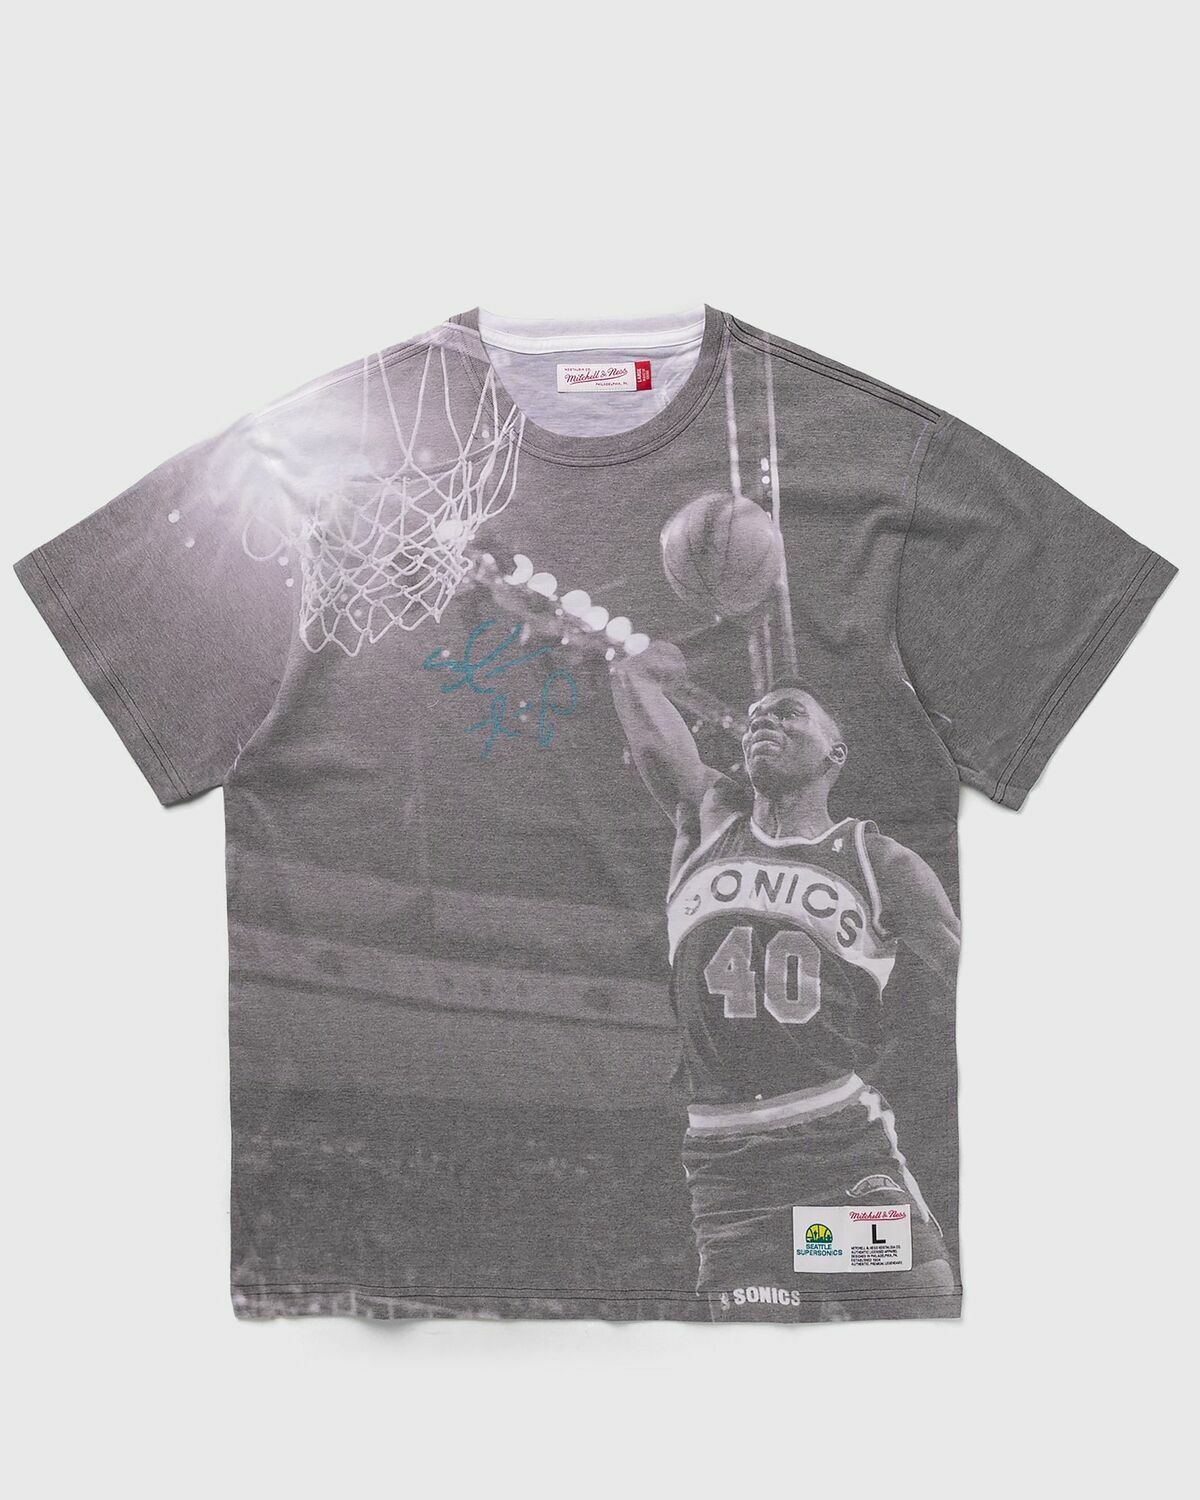 Mitchell & Ness Nba Above The Rim Sublimated S/S Tee Supersonics  Shawn Kemp Grey - Mens - Shortsleeves/Team Tees